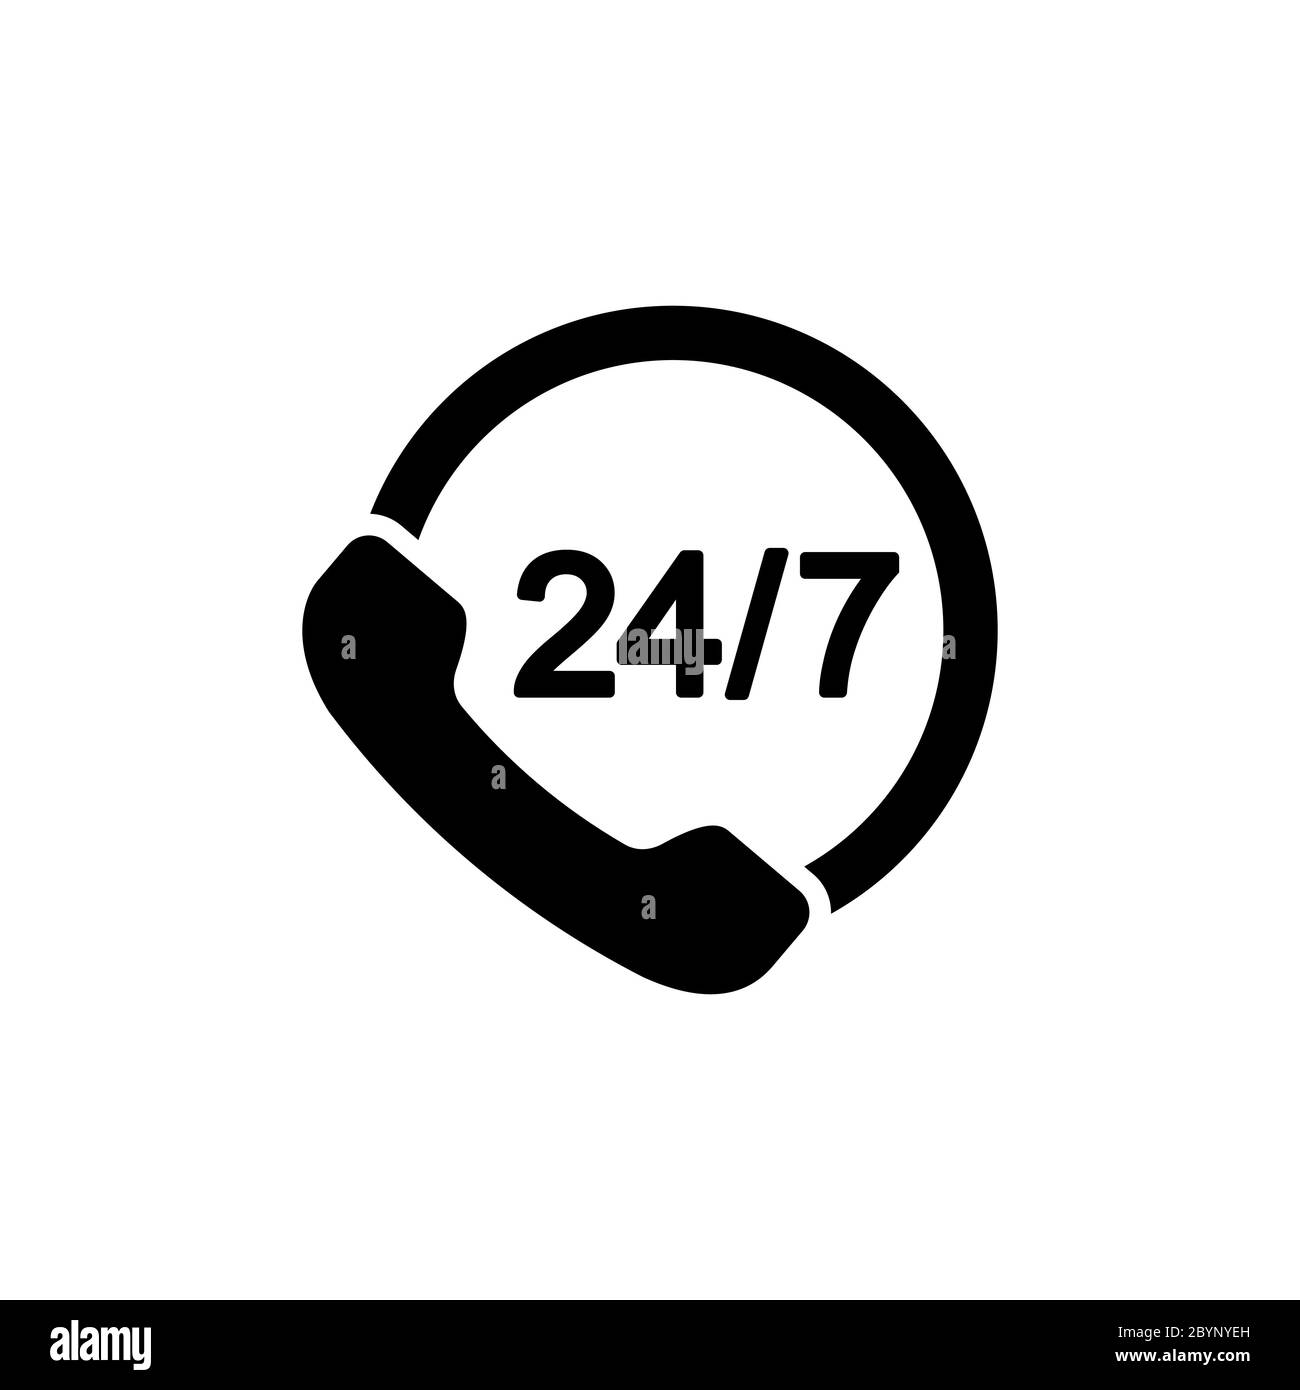 Call center support 24 7 vector icon in black on isolated white background. EPS 10 vector. Stock Vector